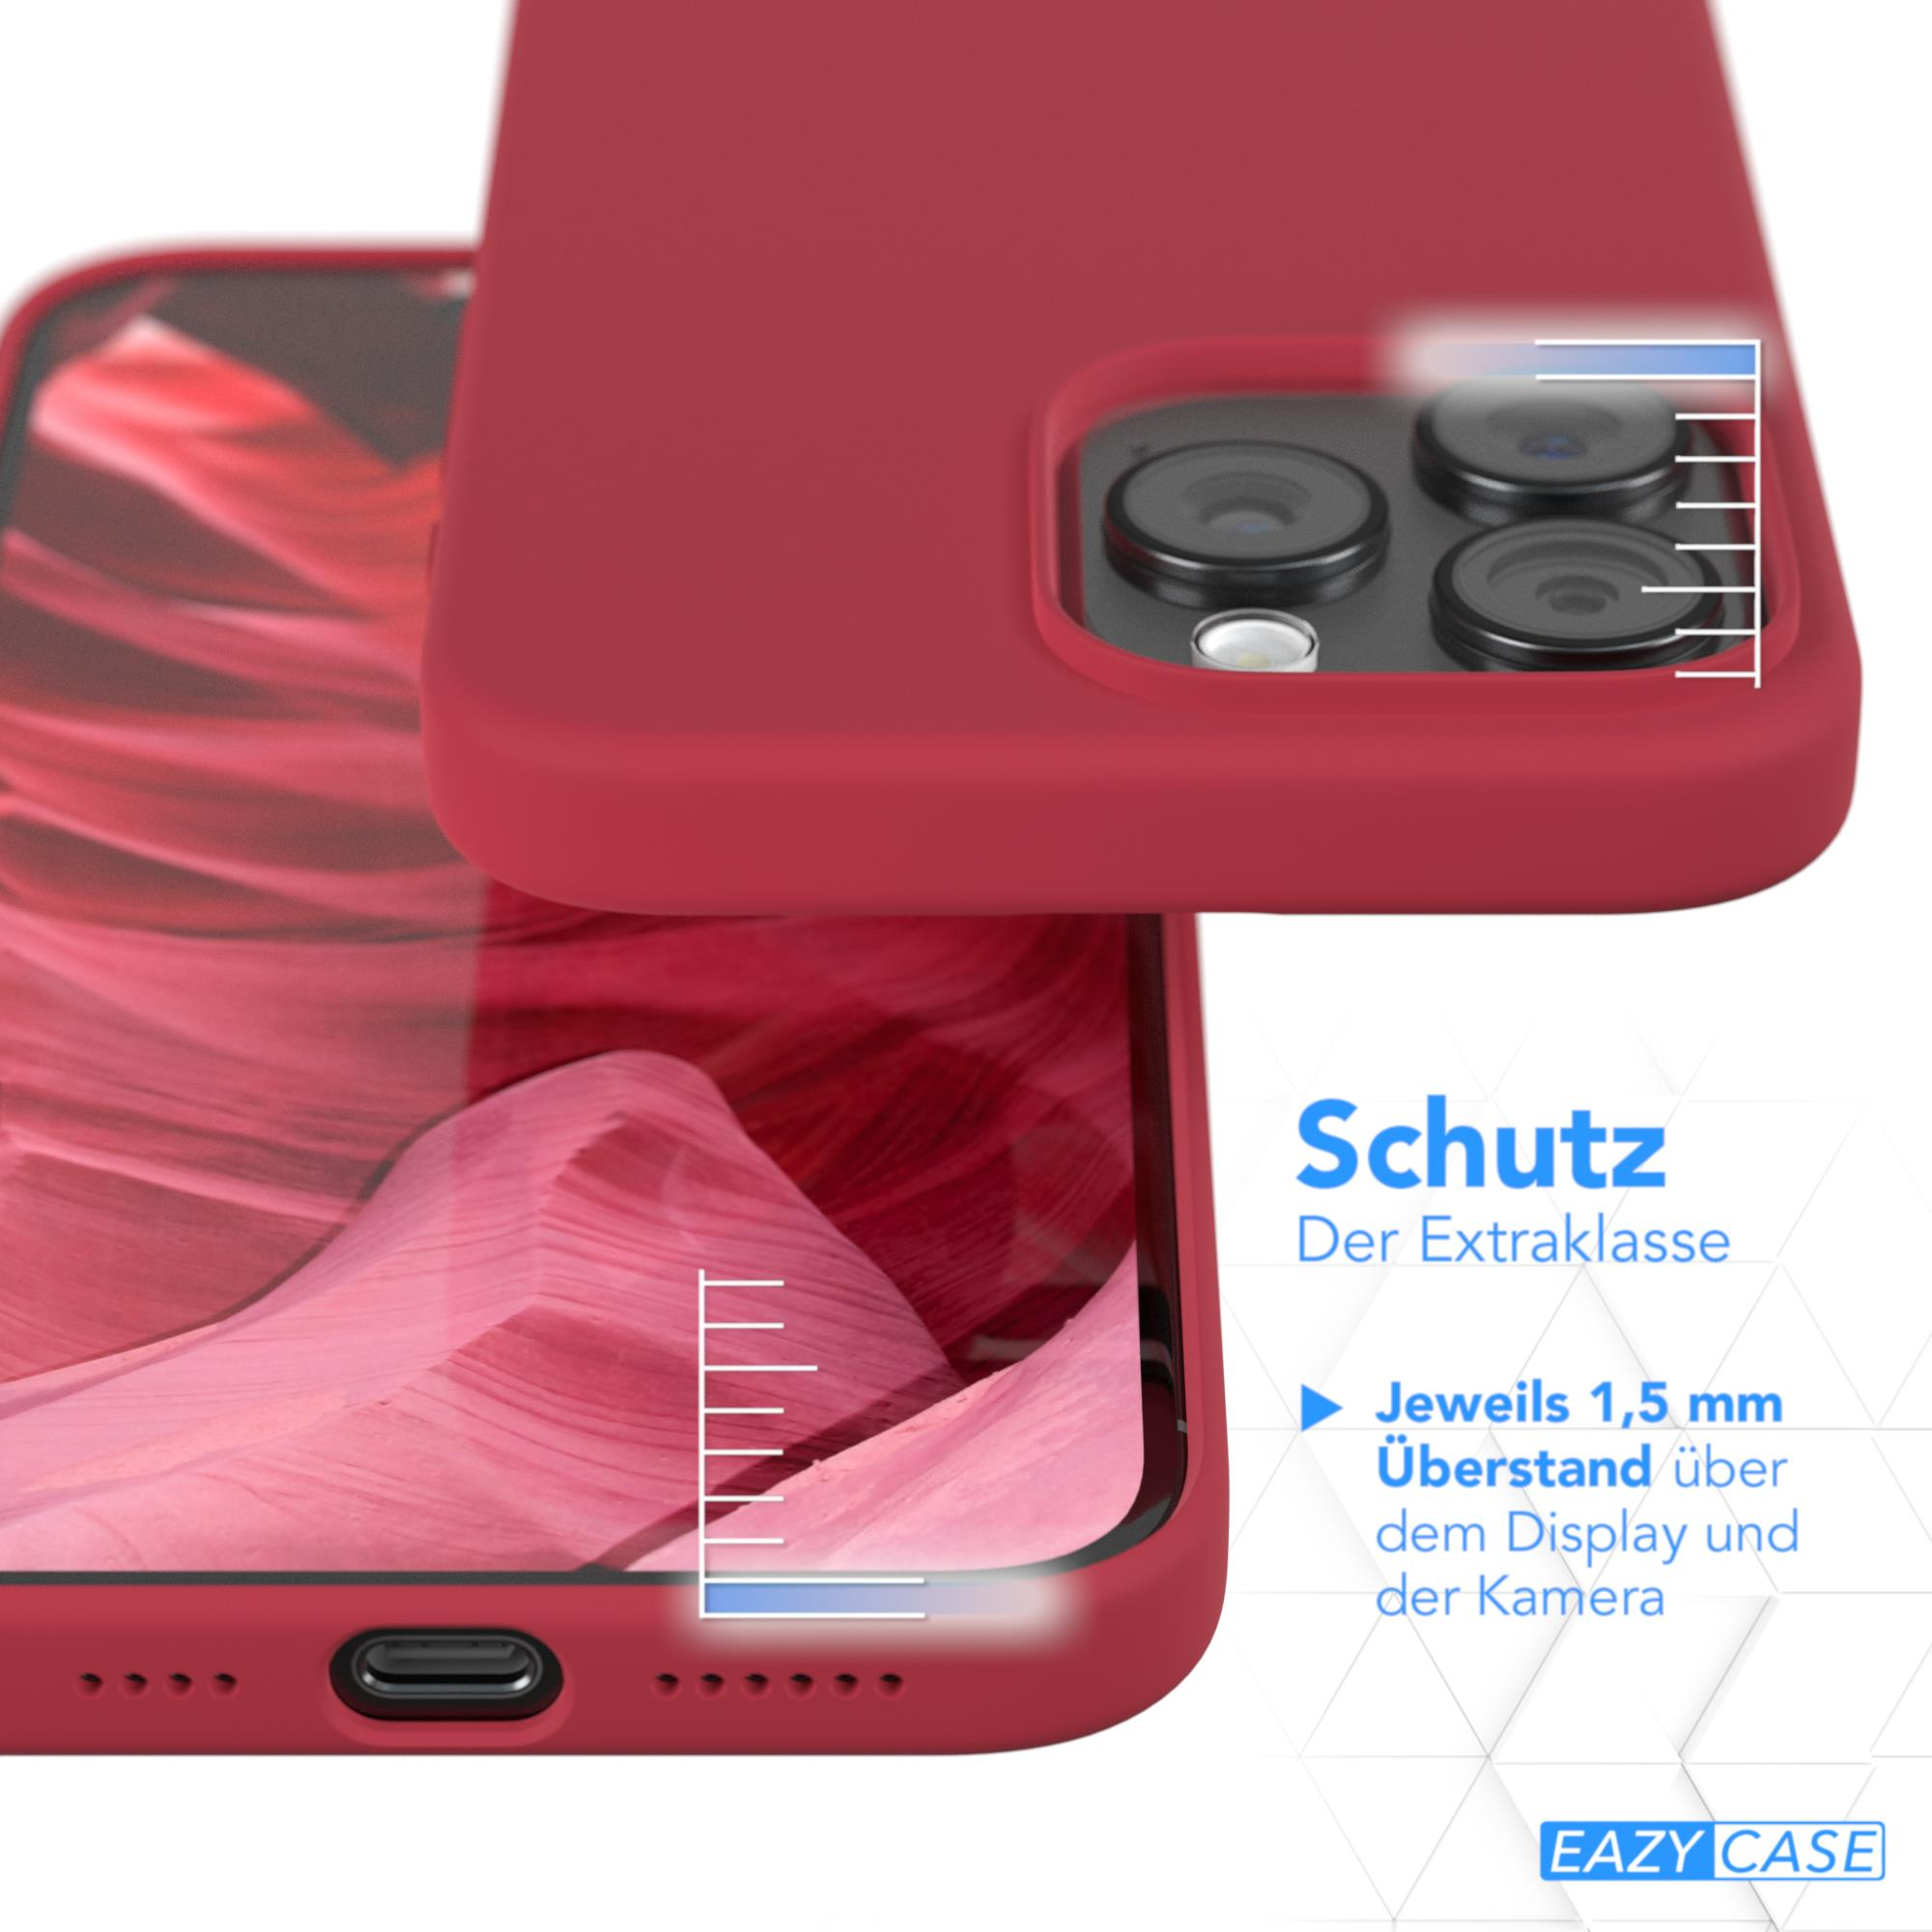 Beere Premium Max, 15 Silikon Backcover, iPhone Rot / EAZY Pro Apple, CASE Handycase,